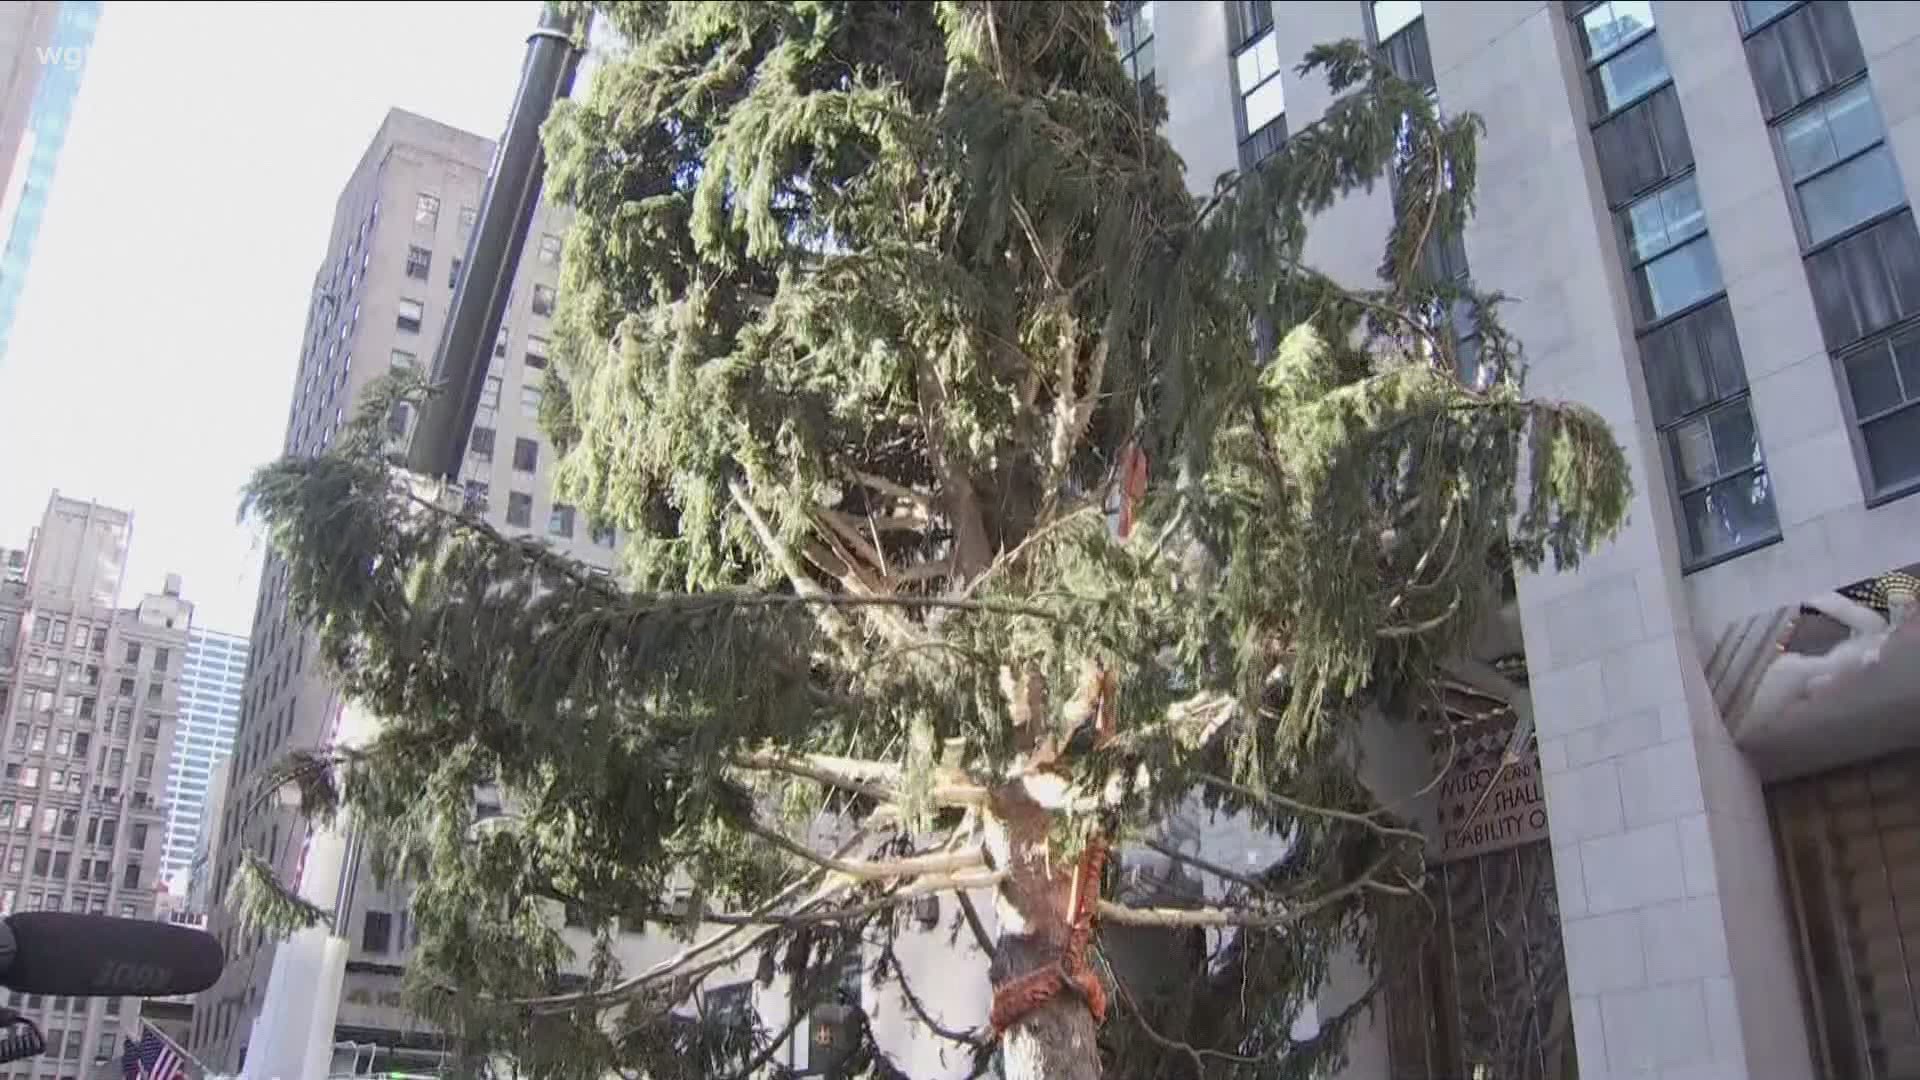 The 75 foot tall, 11 ton Norway Spruce grew up in Oneonta, New York. Soon it will be adorned with thousands of LED lights.